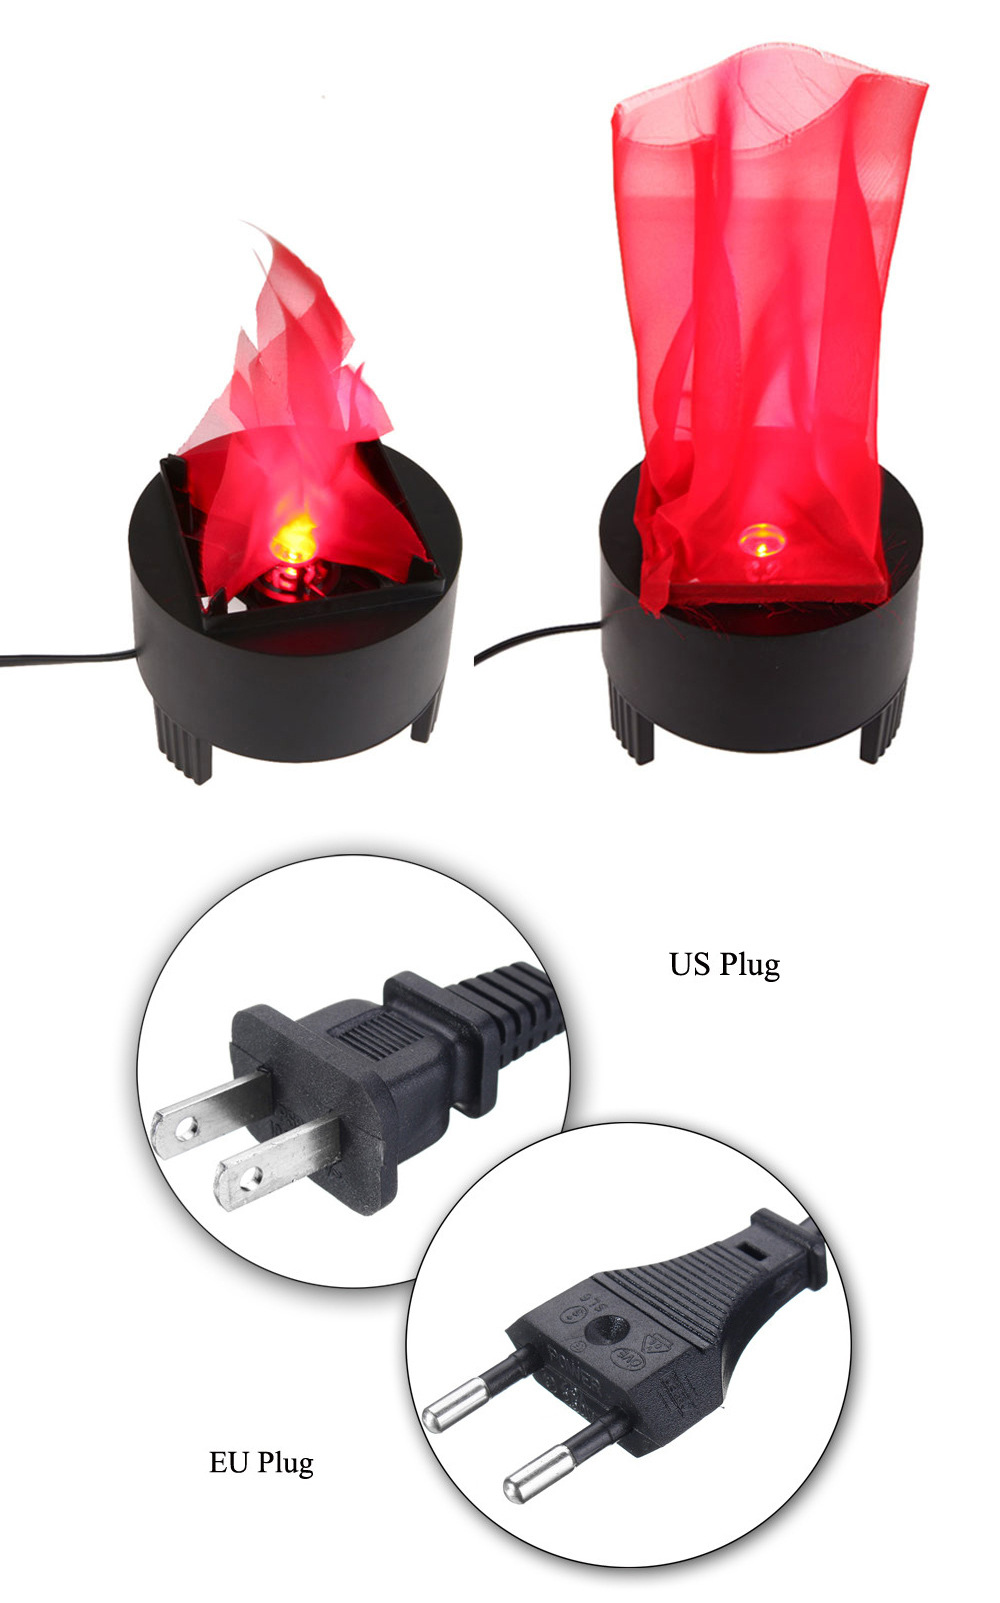 LED-Hanging-Simulation-Flame-Lamp-Halloween-Decoration-Brazier-Lamp-3D-Dynamic-Christmas-Projector-L-1917975-7